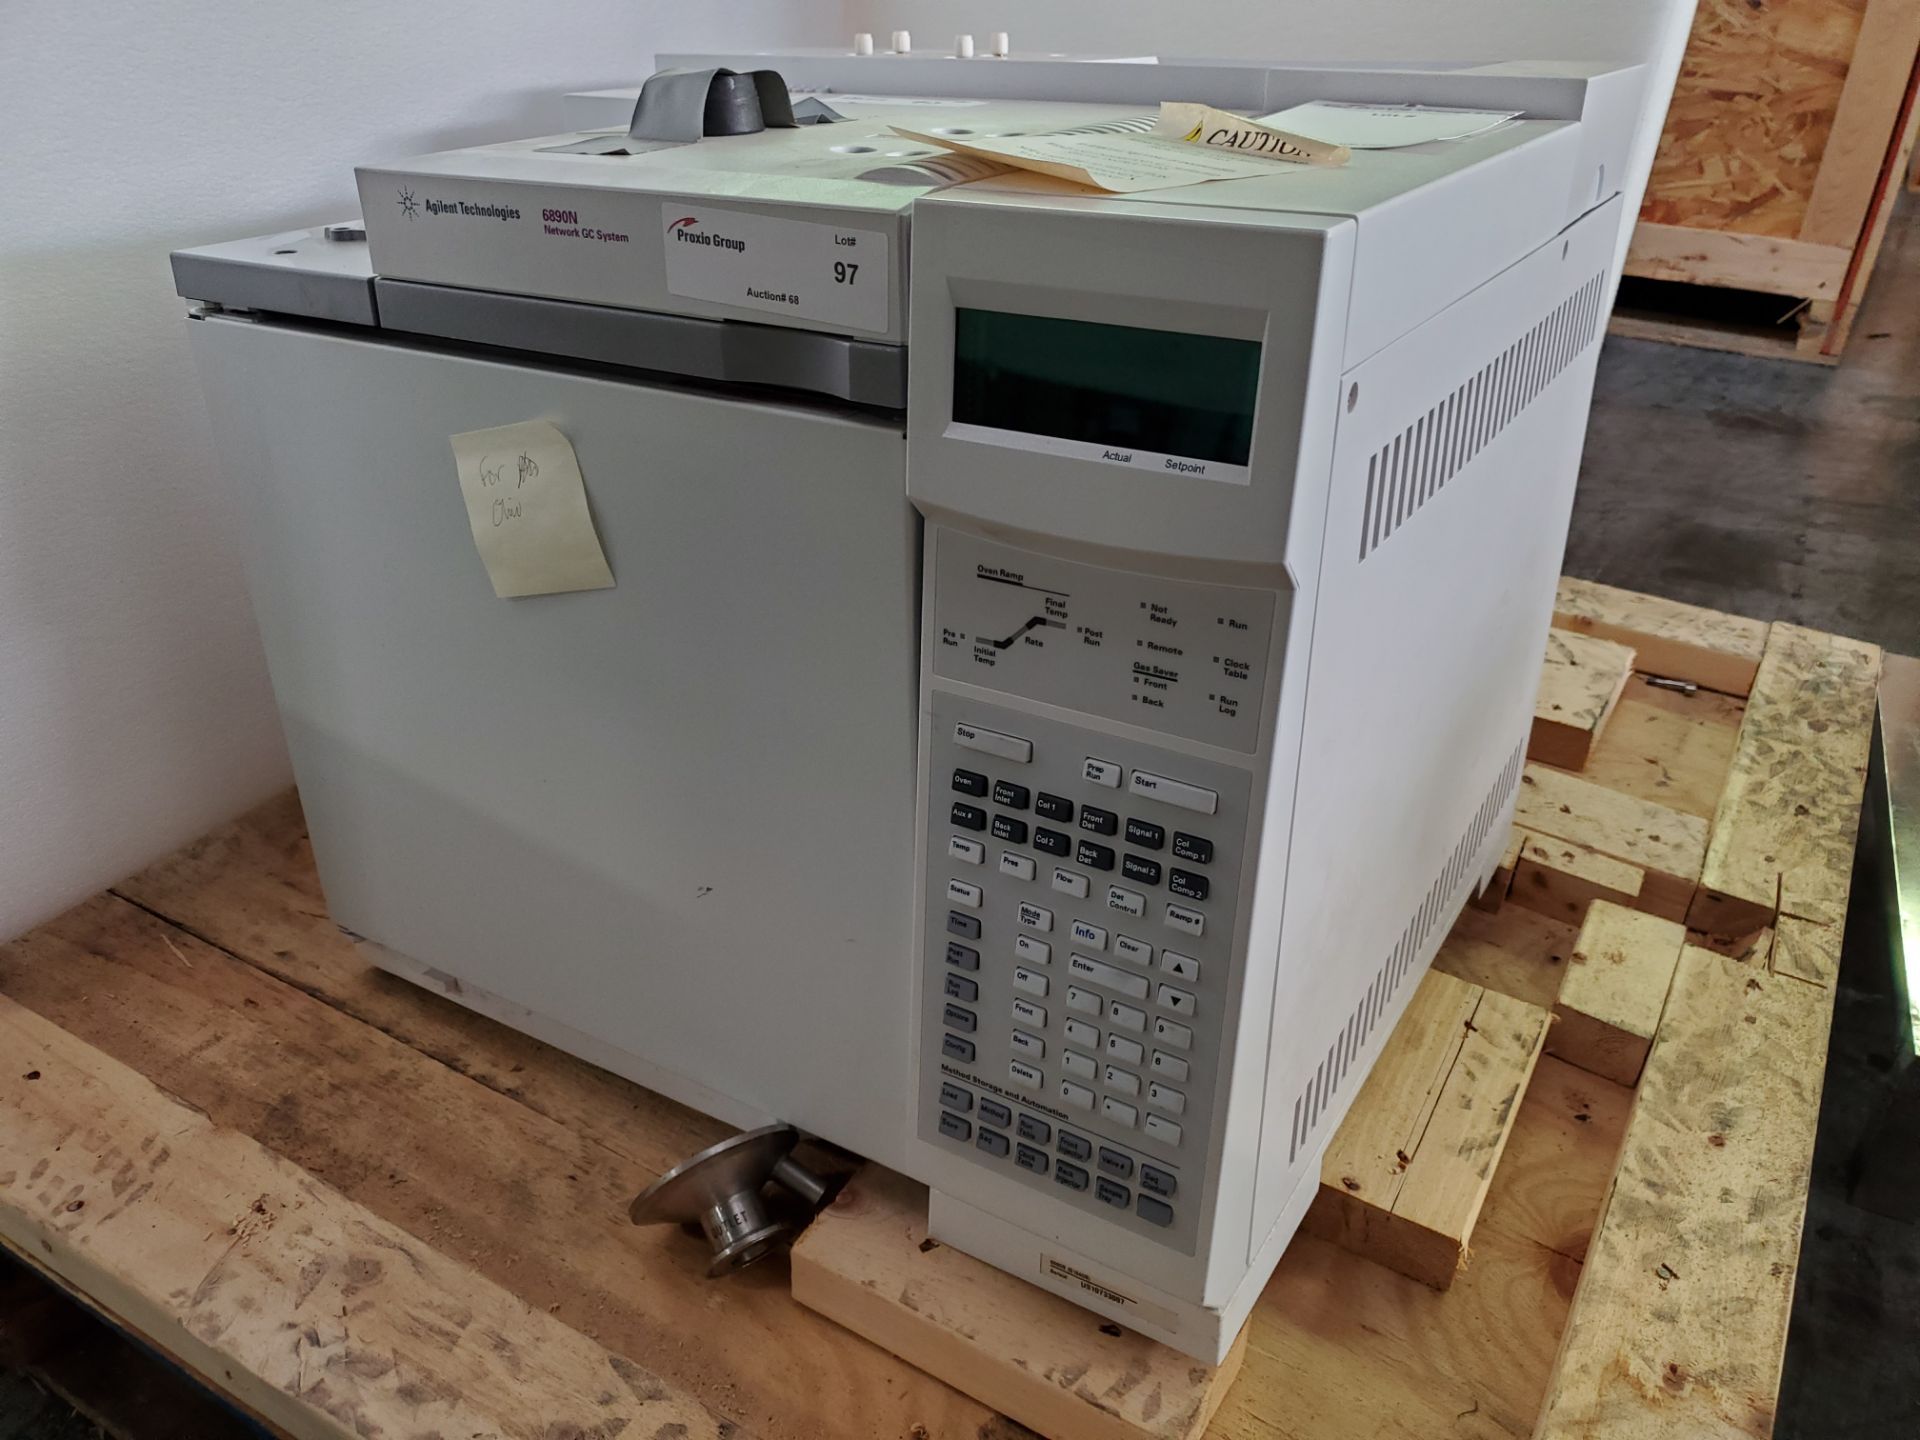 Agilent Gas Chromatograph, model 6890N (needs to be uncrated)